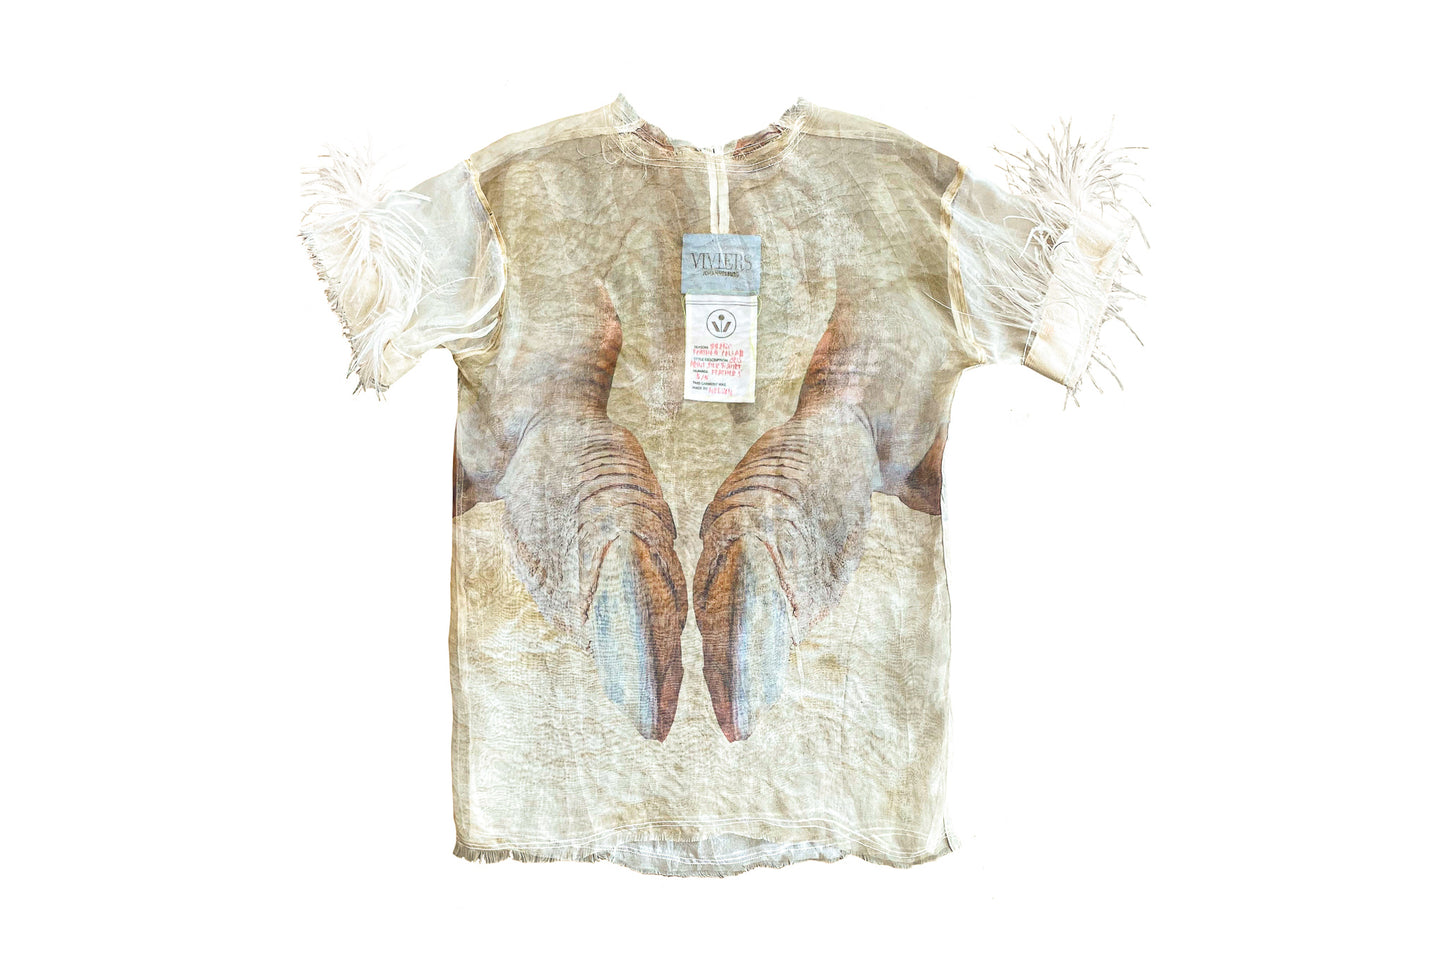 Feathered Fabrics x Viviers Collaboration T-Shirt